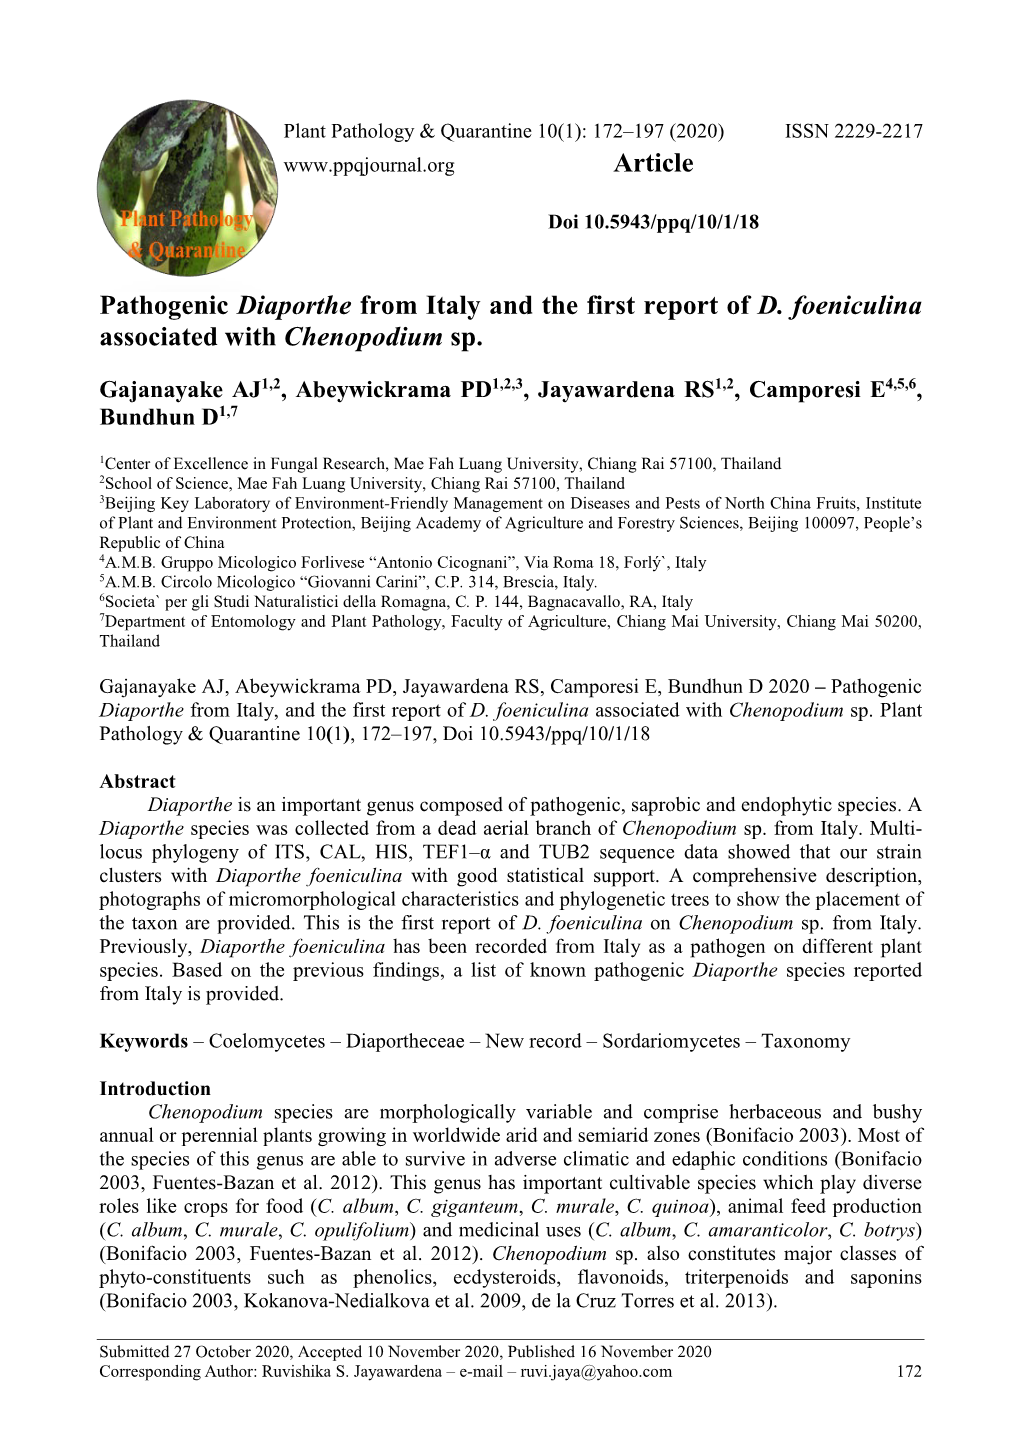 Pathogenic Diaporthe from Italy and the First Report of D. Foeniculina Associated with Chenopodium Sp